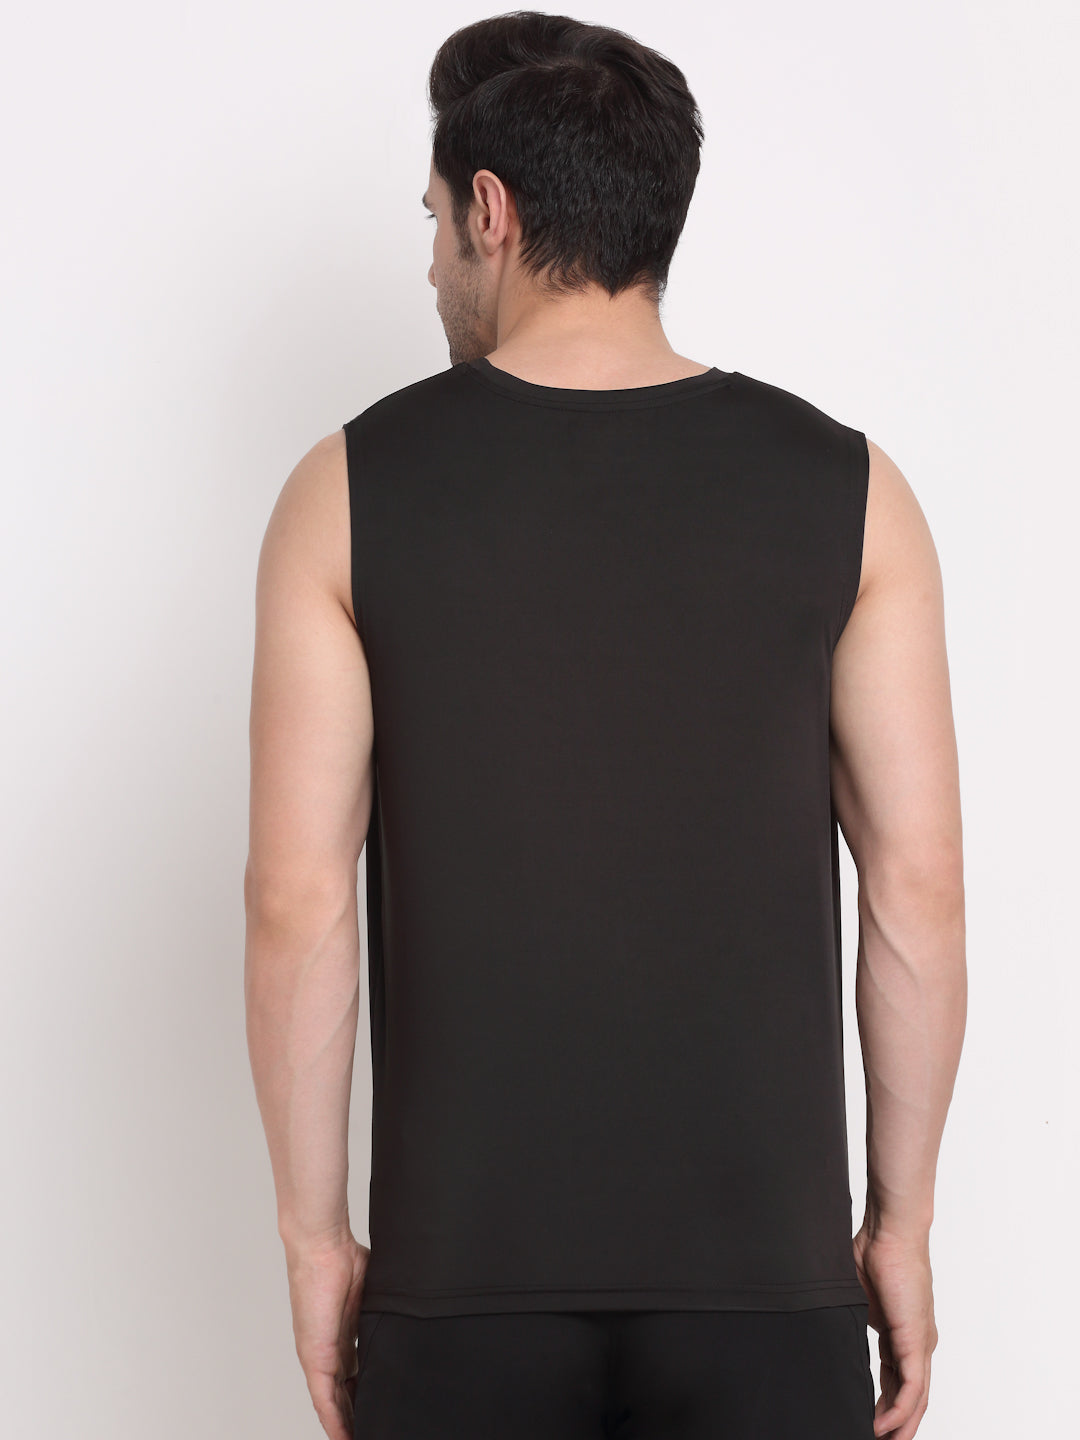 Invincible Men's Sleeveless Tee With Detail